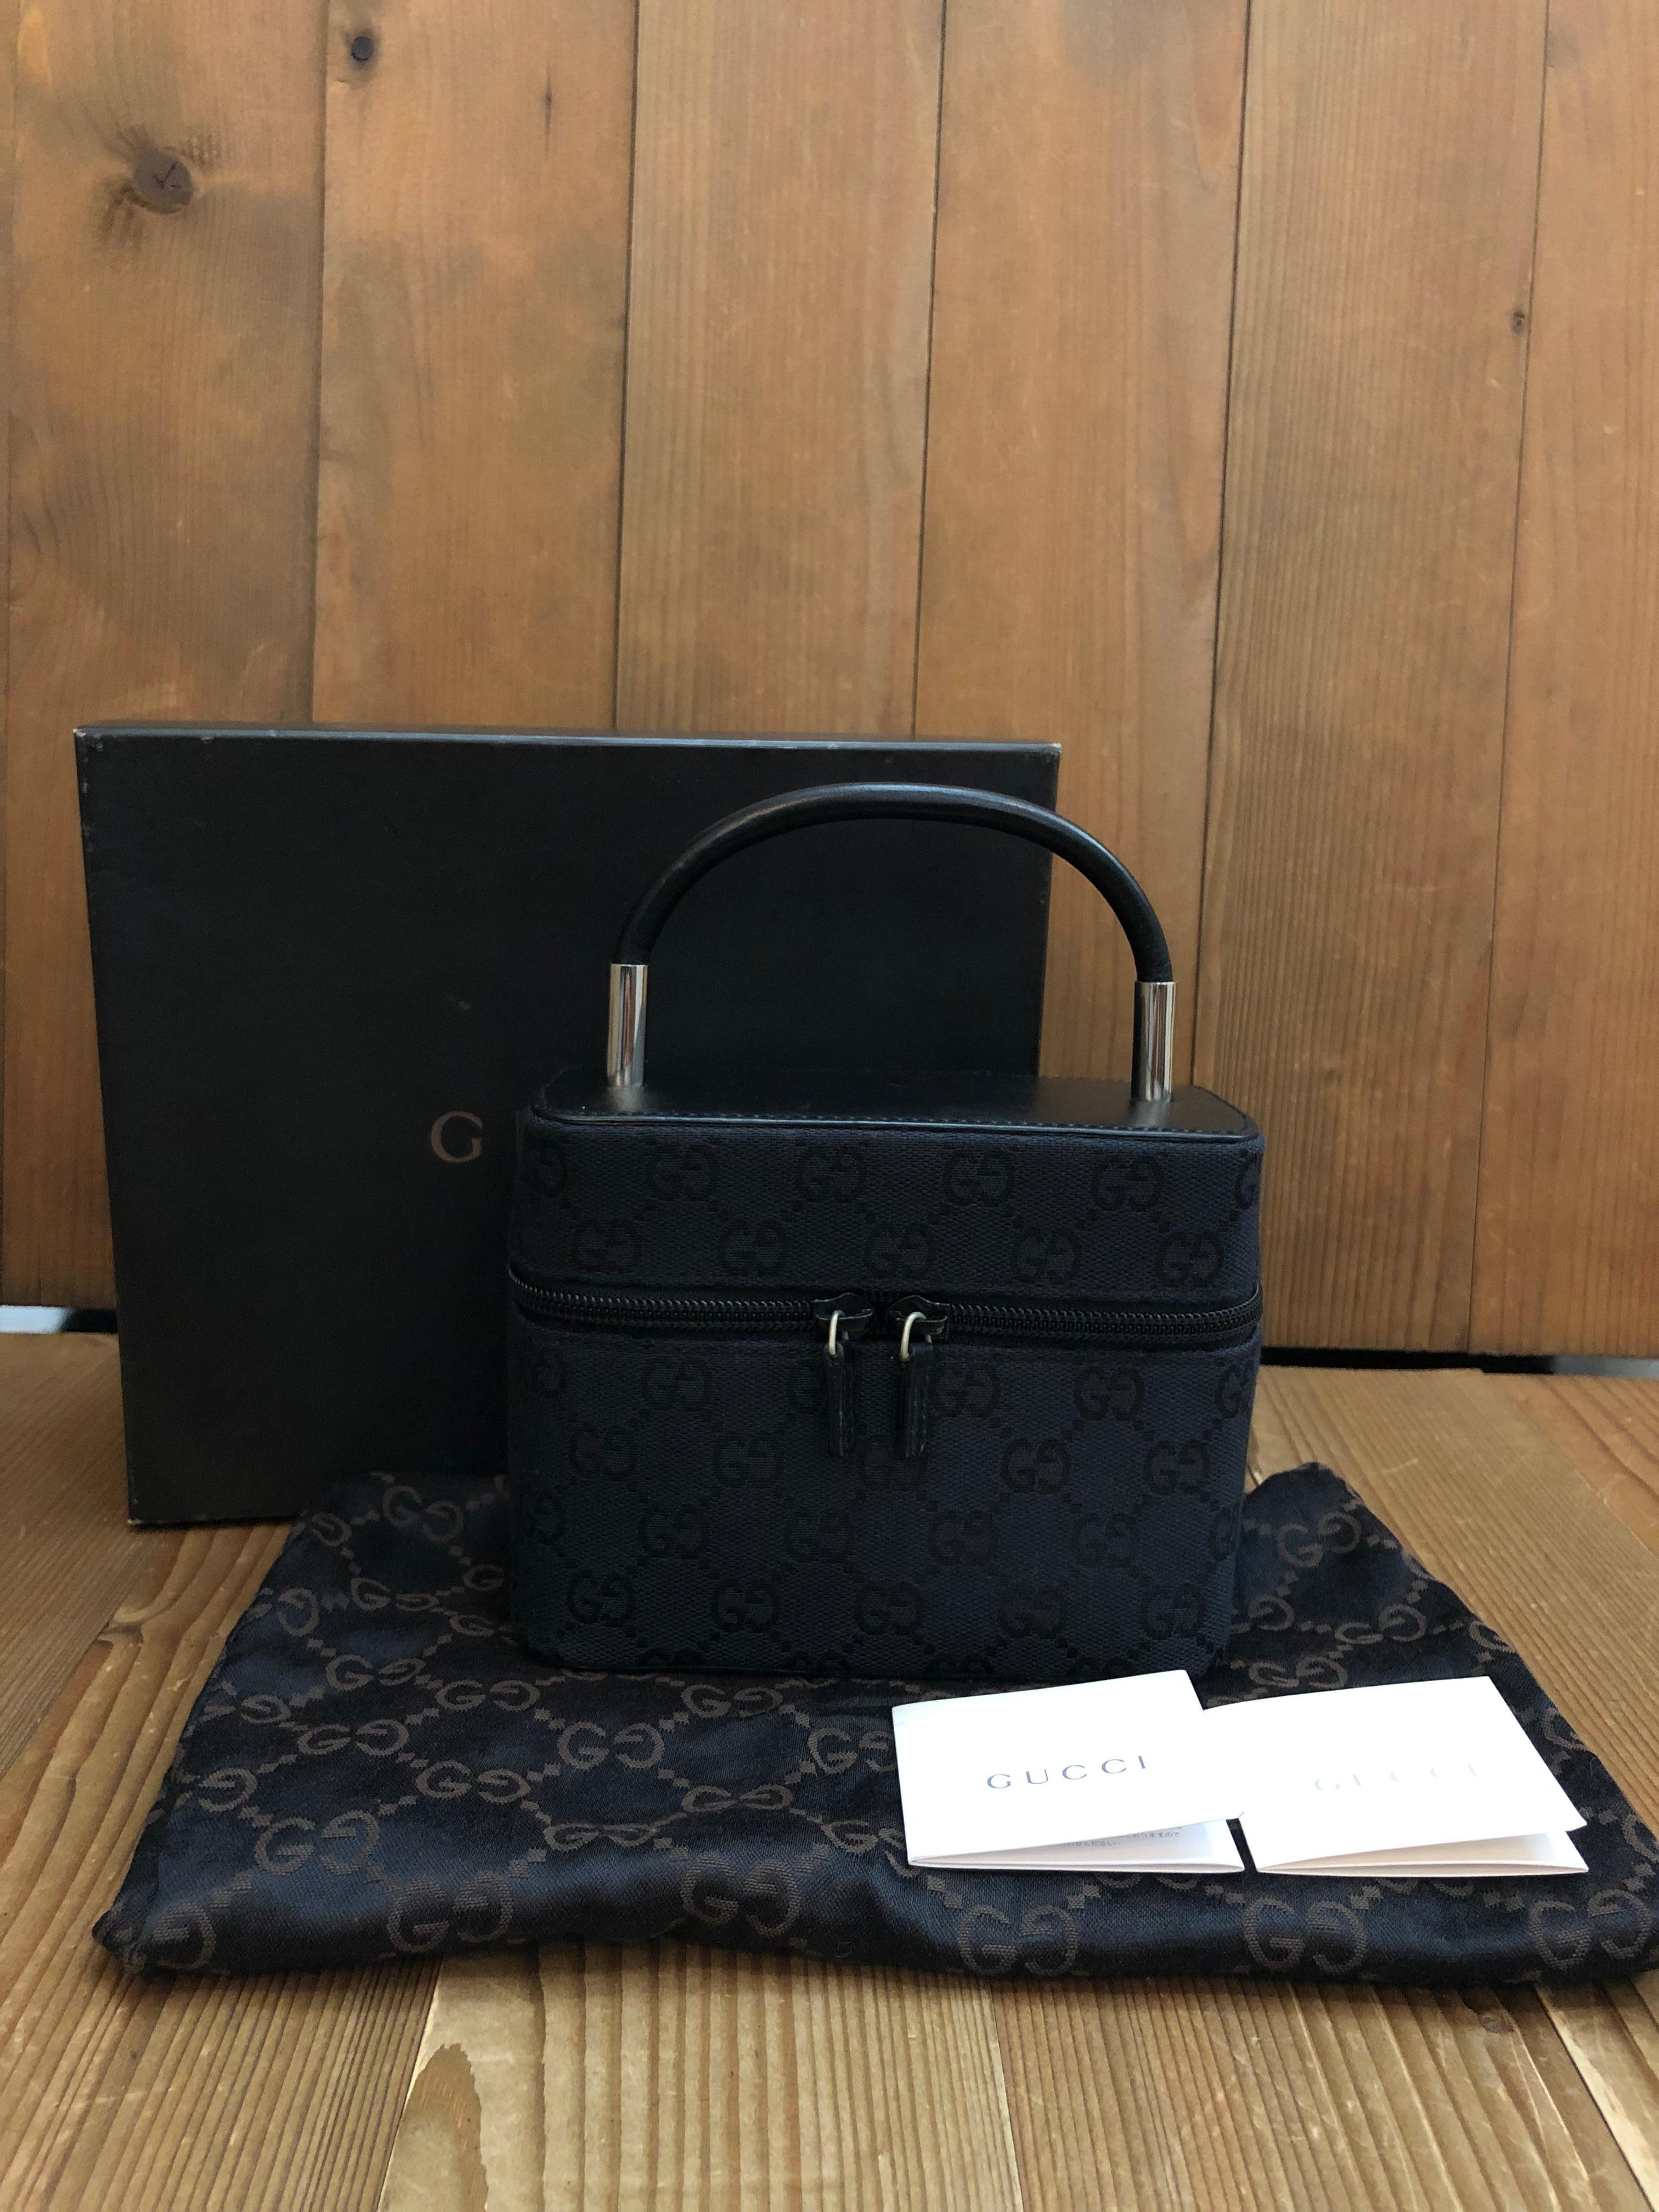 This vintage GUCCI vanity case handbag is crafted of GG jacquard and smooth calfskin leather in black featuring silver toned hardware. Zip-around closure opens to a black GUCCI fabric featuring a zippered pocket and elastic bands. Made in Italy.